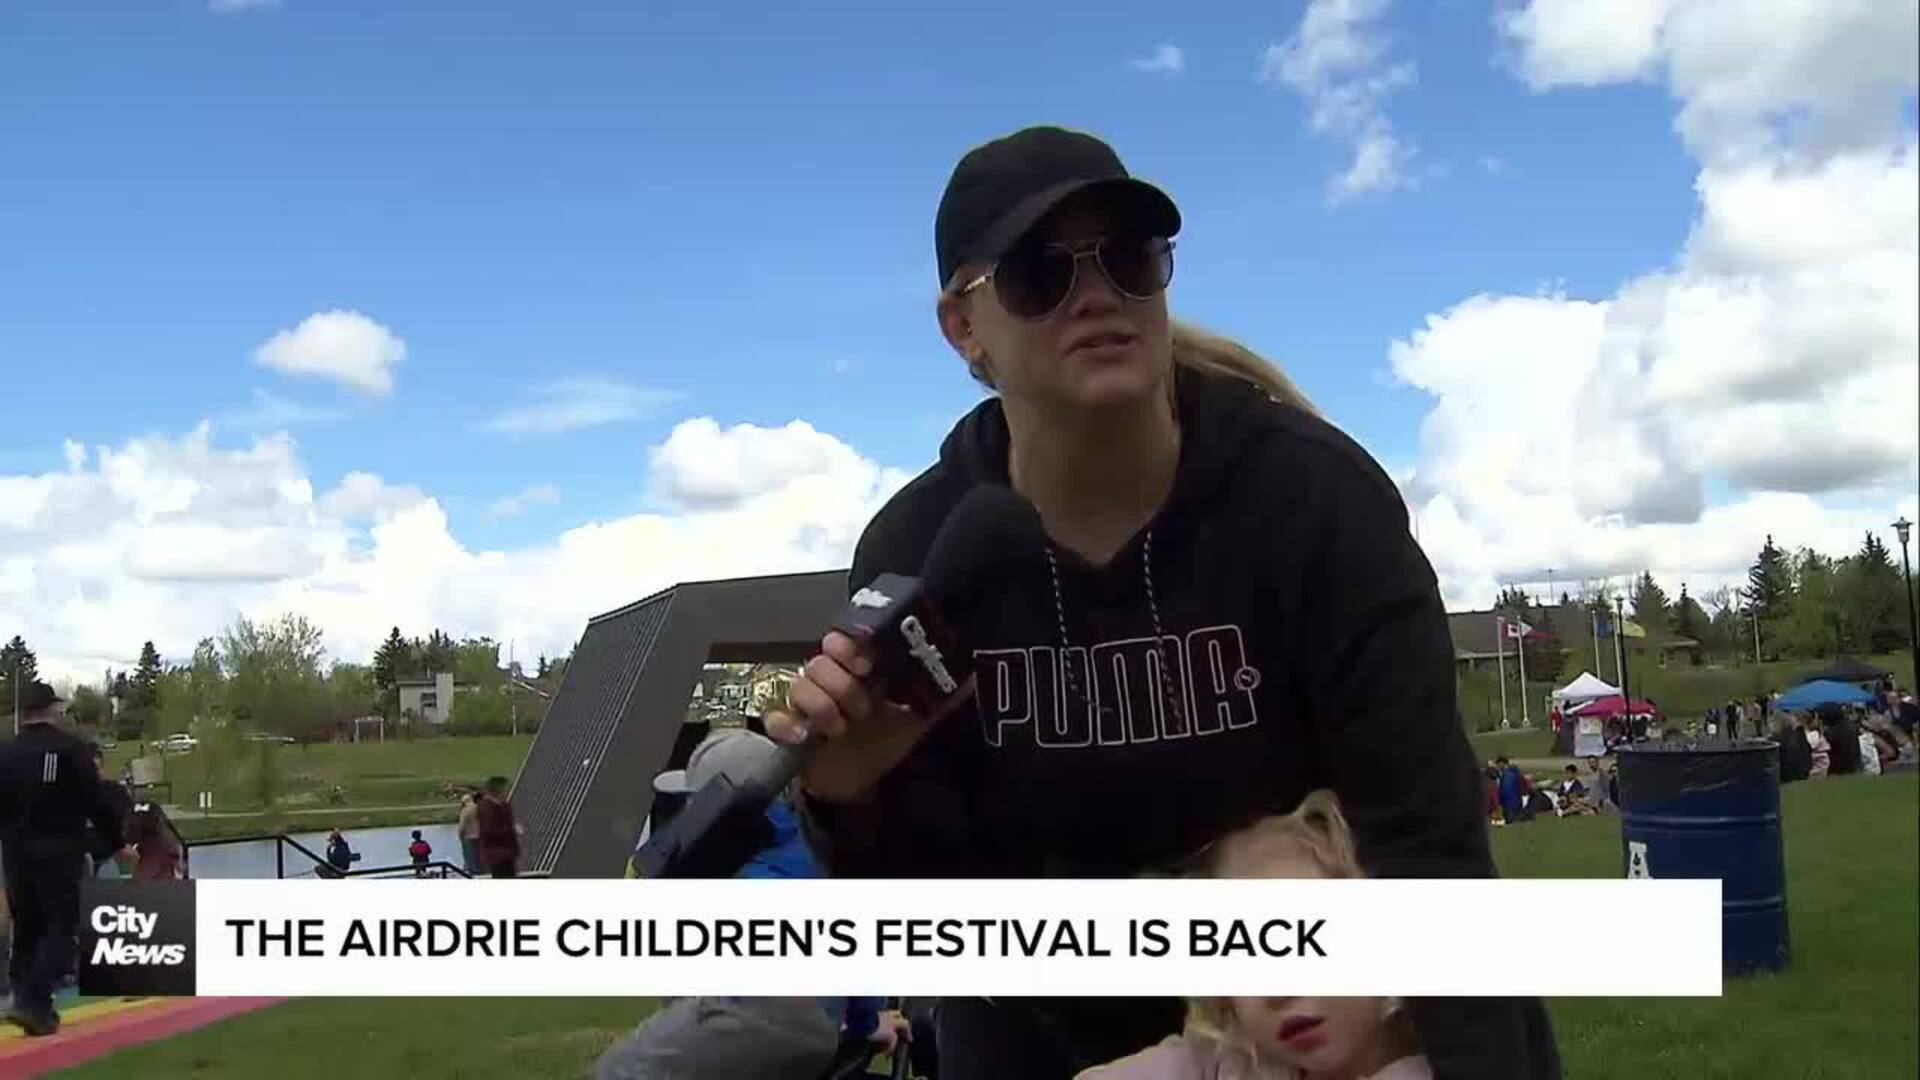 The Airdrie Children's Festival is back